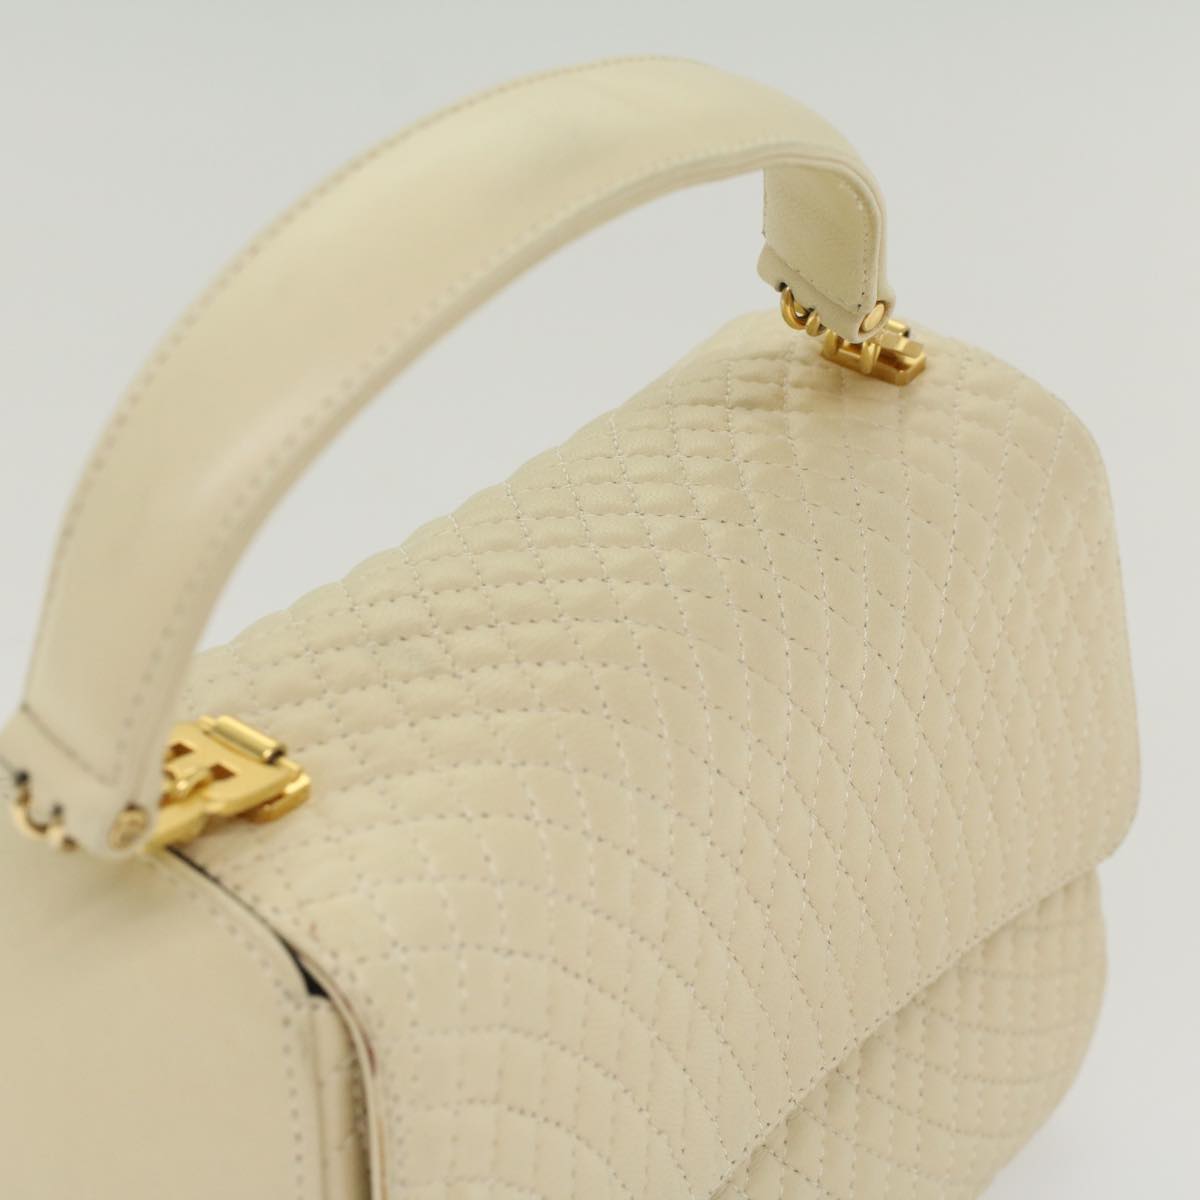 BALLY Quilted Hand Bag Lamb Skin White Auth ep1259